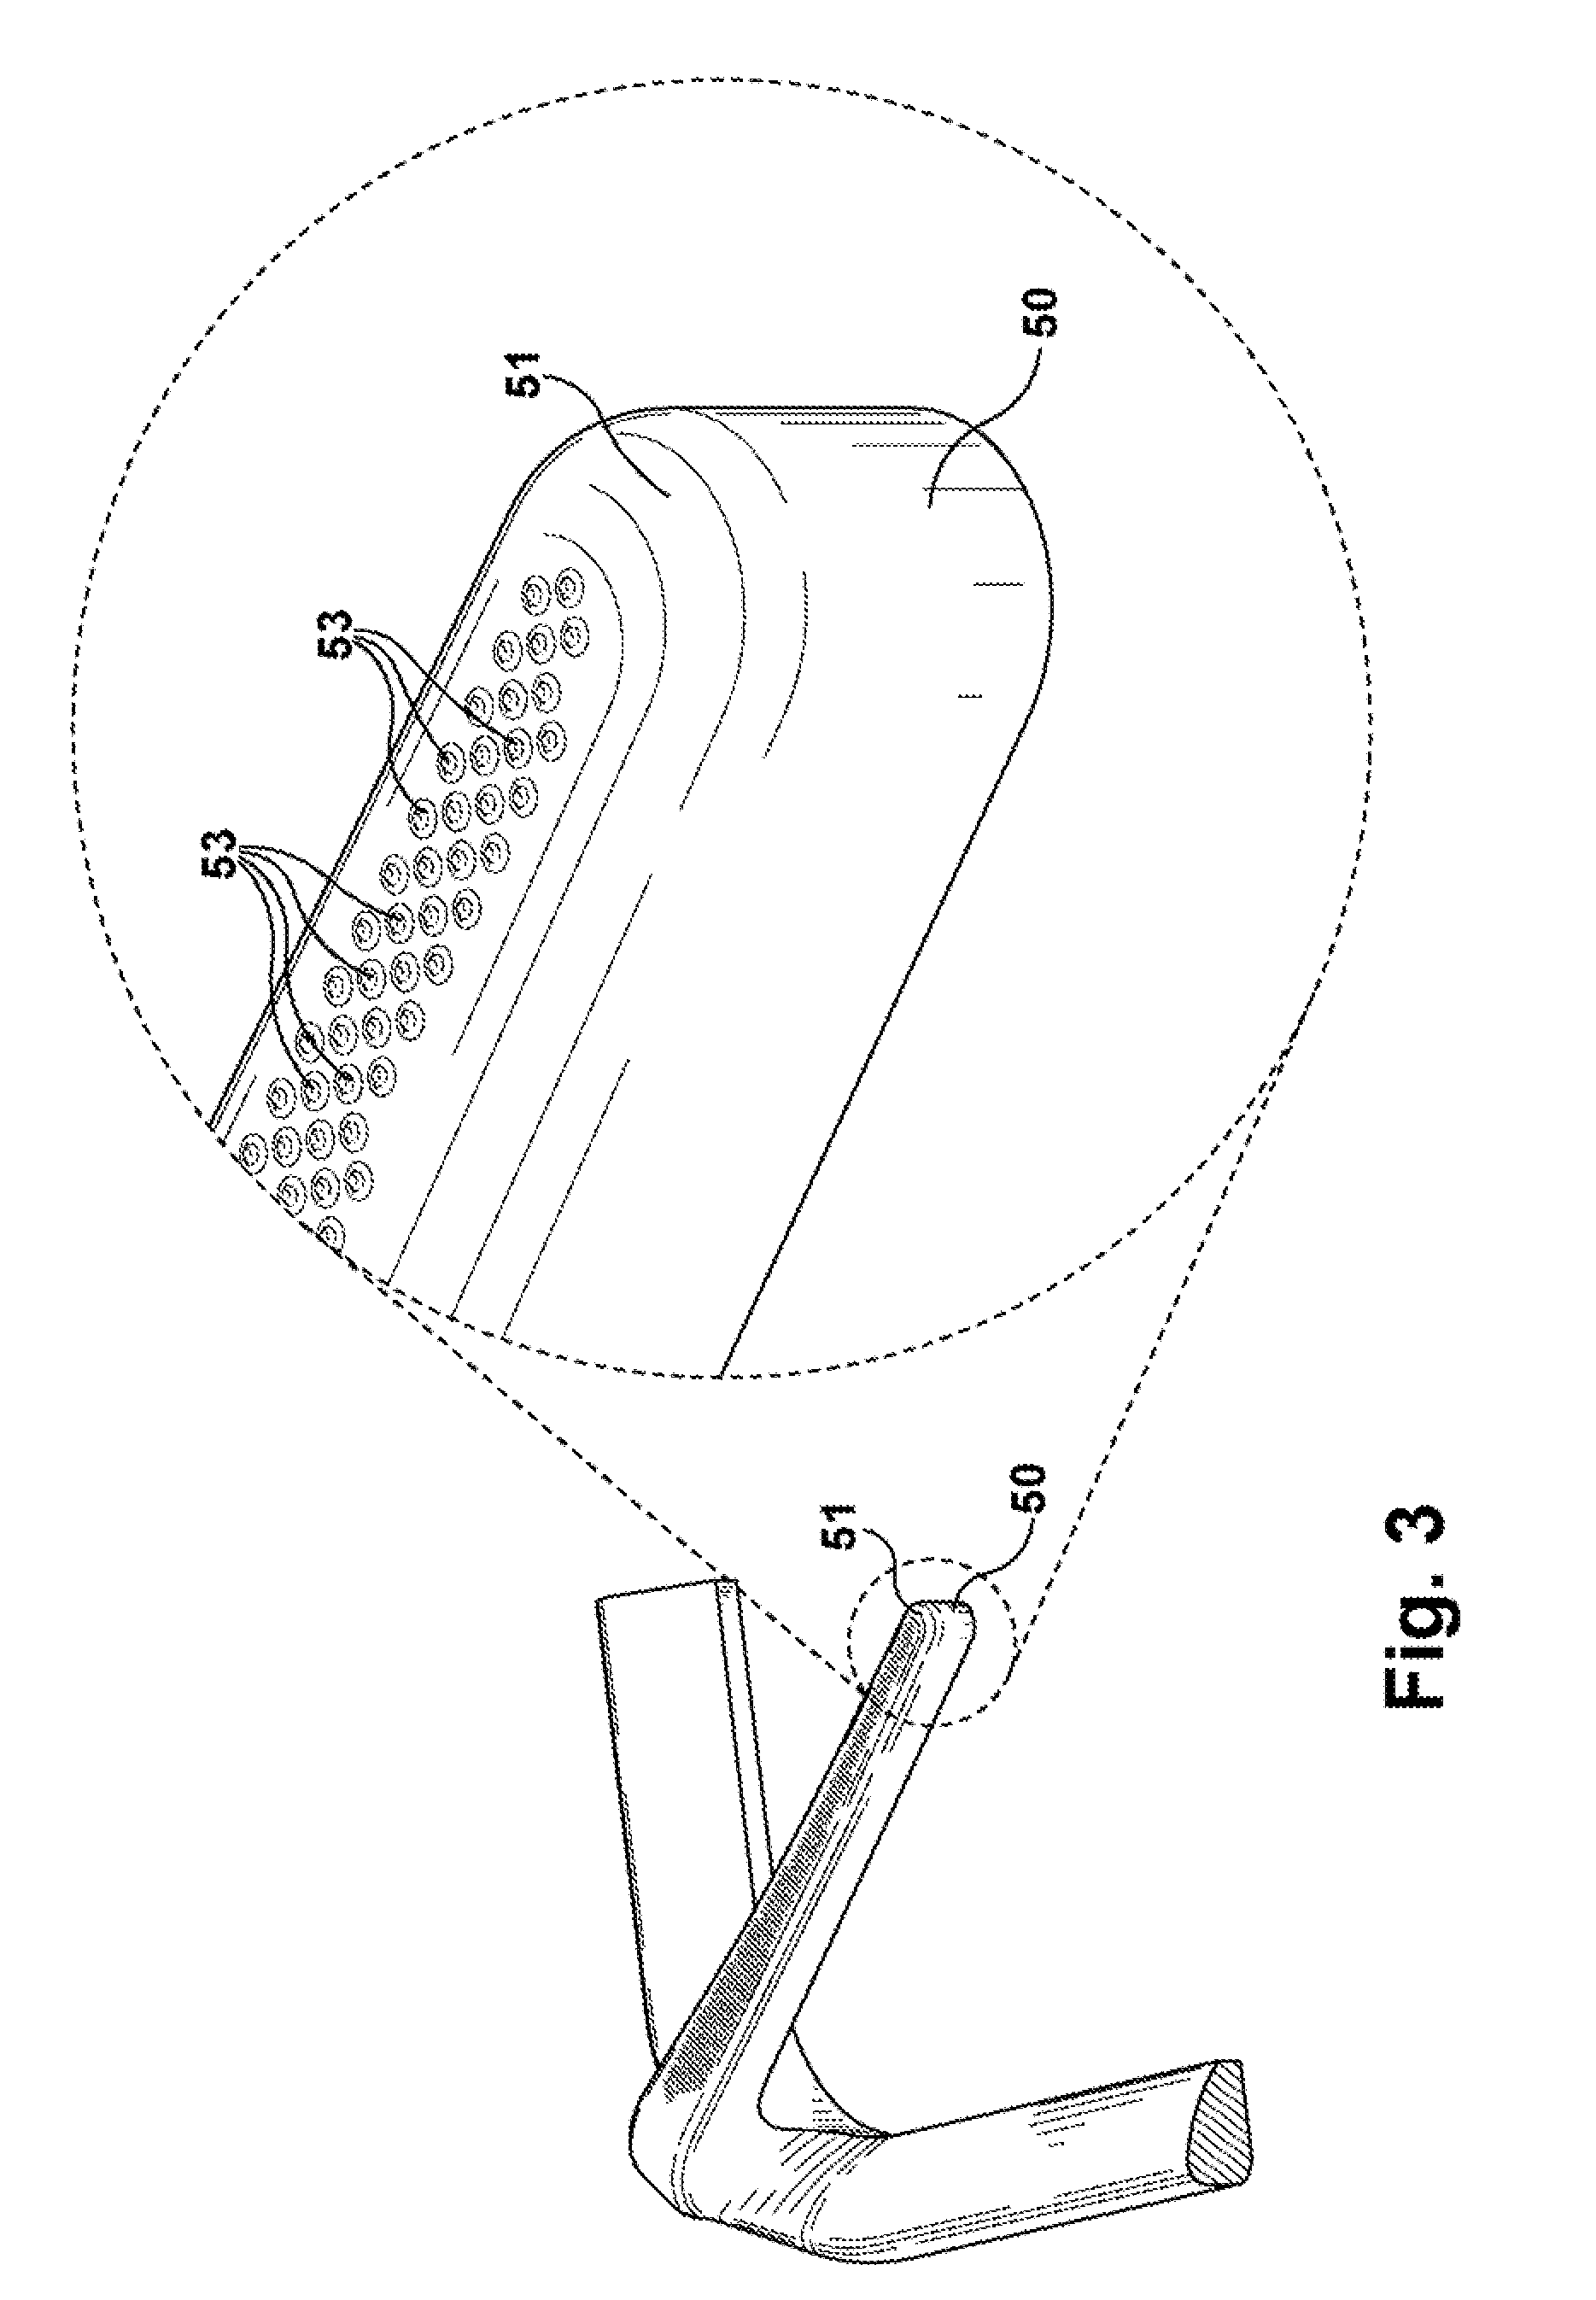 Grate apparatus and method